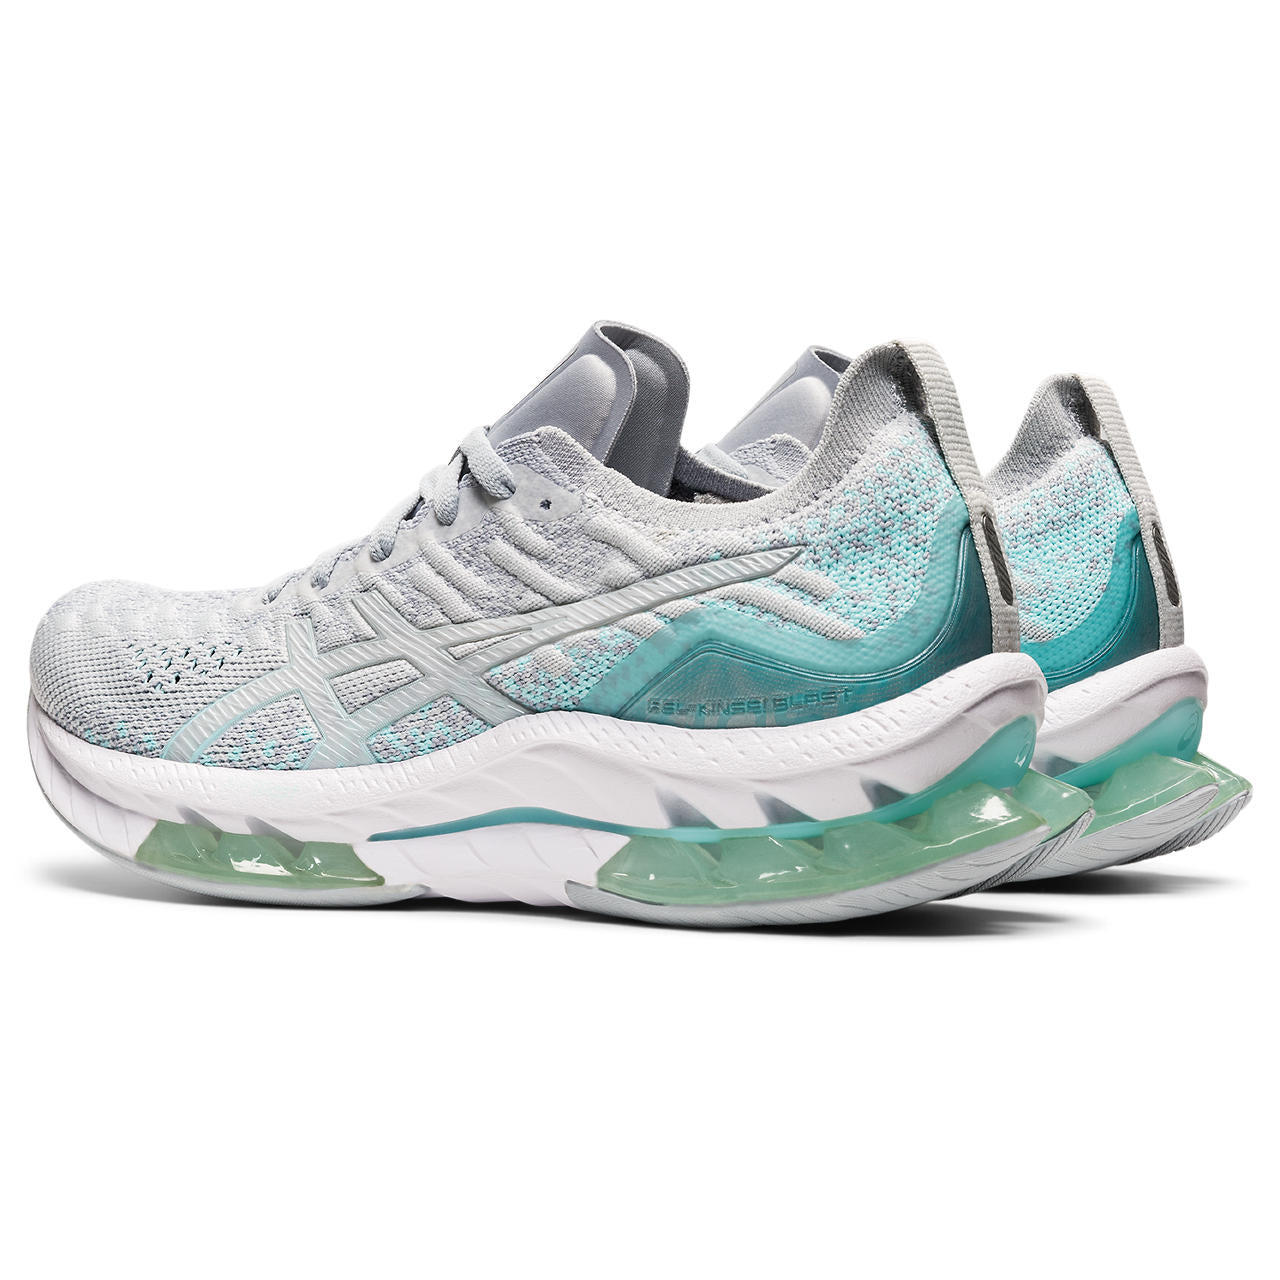 Back angled view of the Women's Kinsei Blast by ASIC in the color Glacier Grey/Piedmont Grey